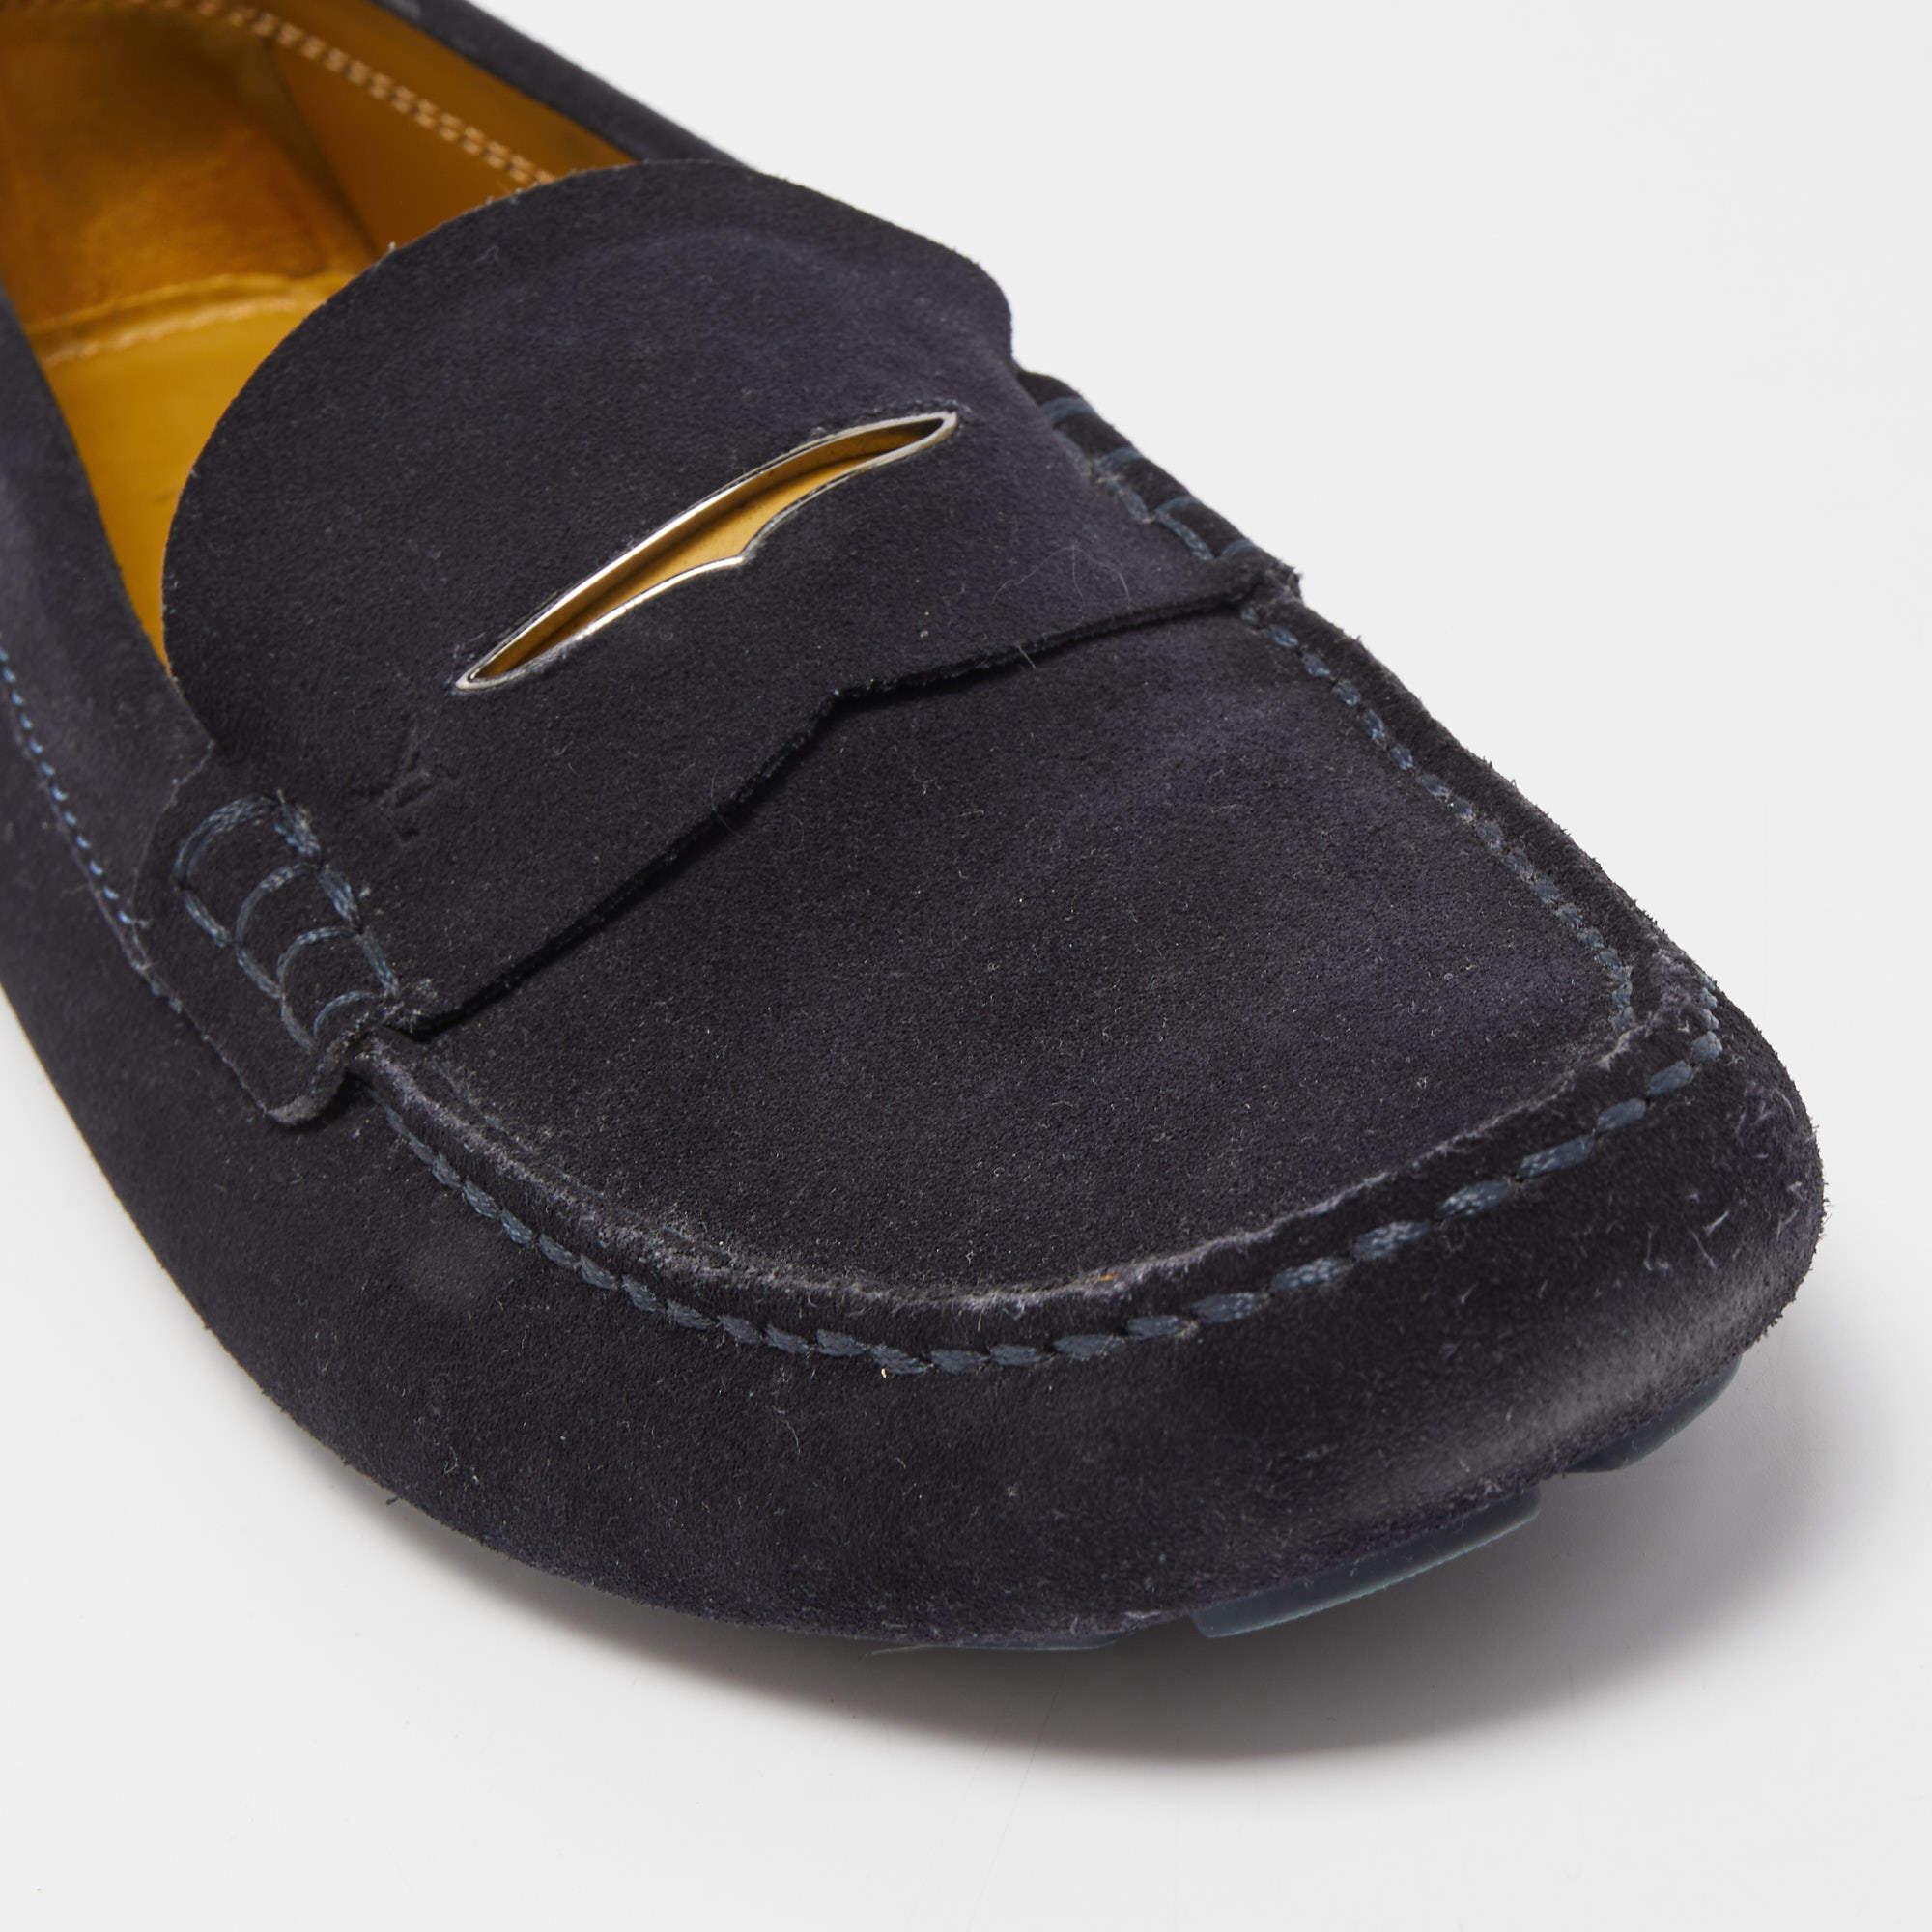 Louis Vuitton Navy Blue Suede Slip On Loafers Size 44.5 1